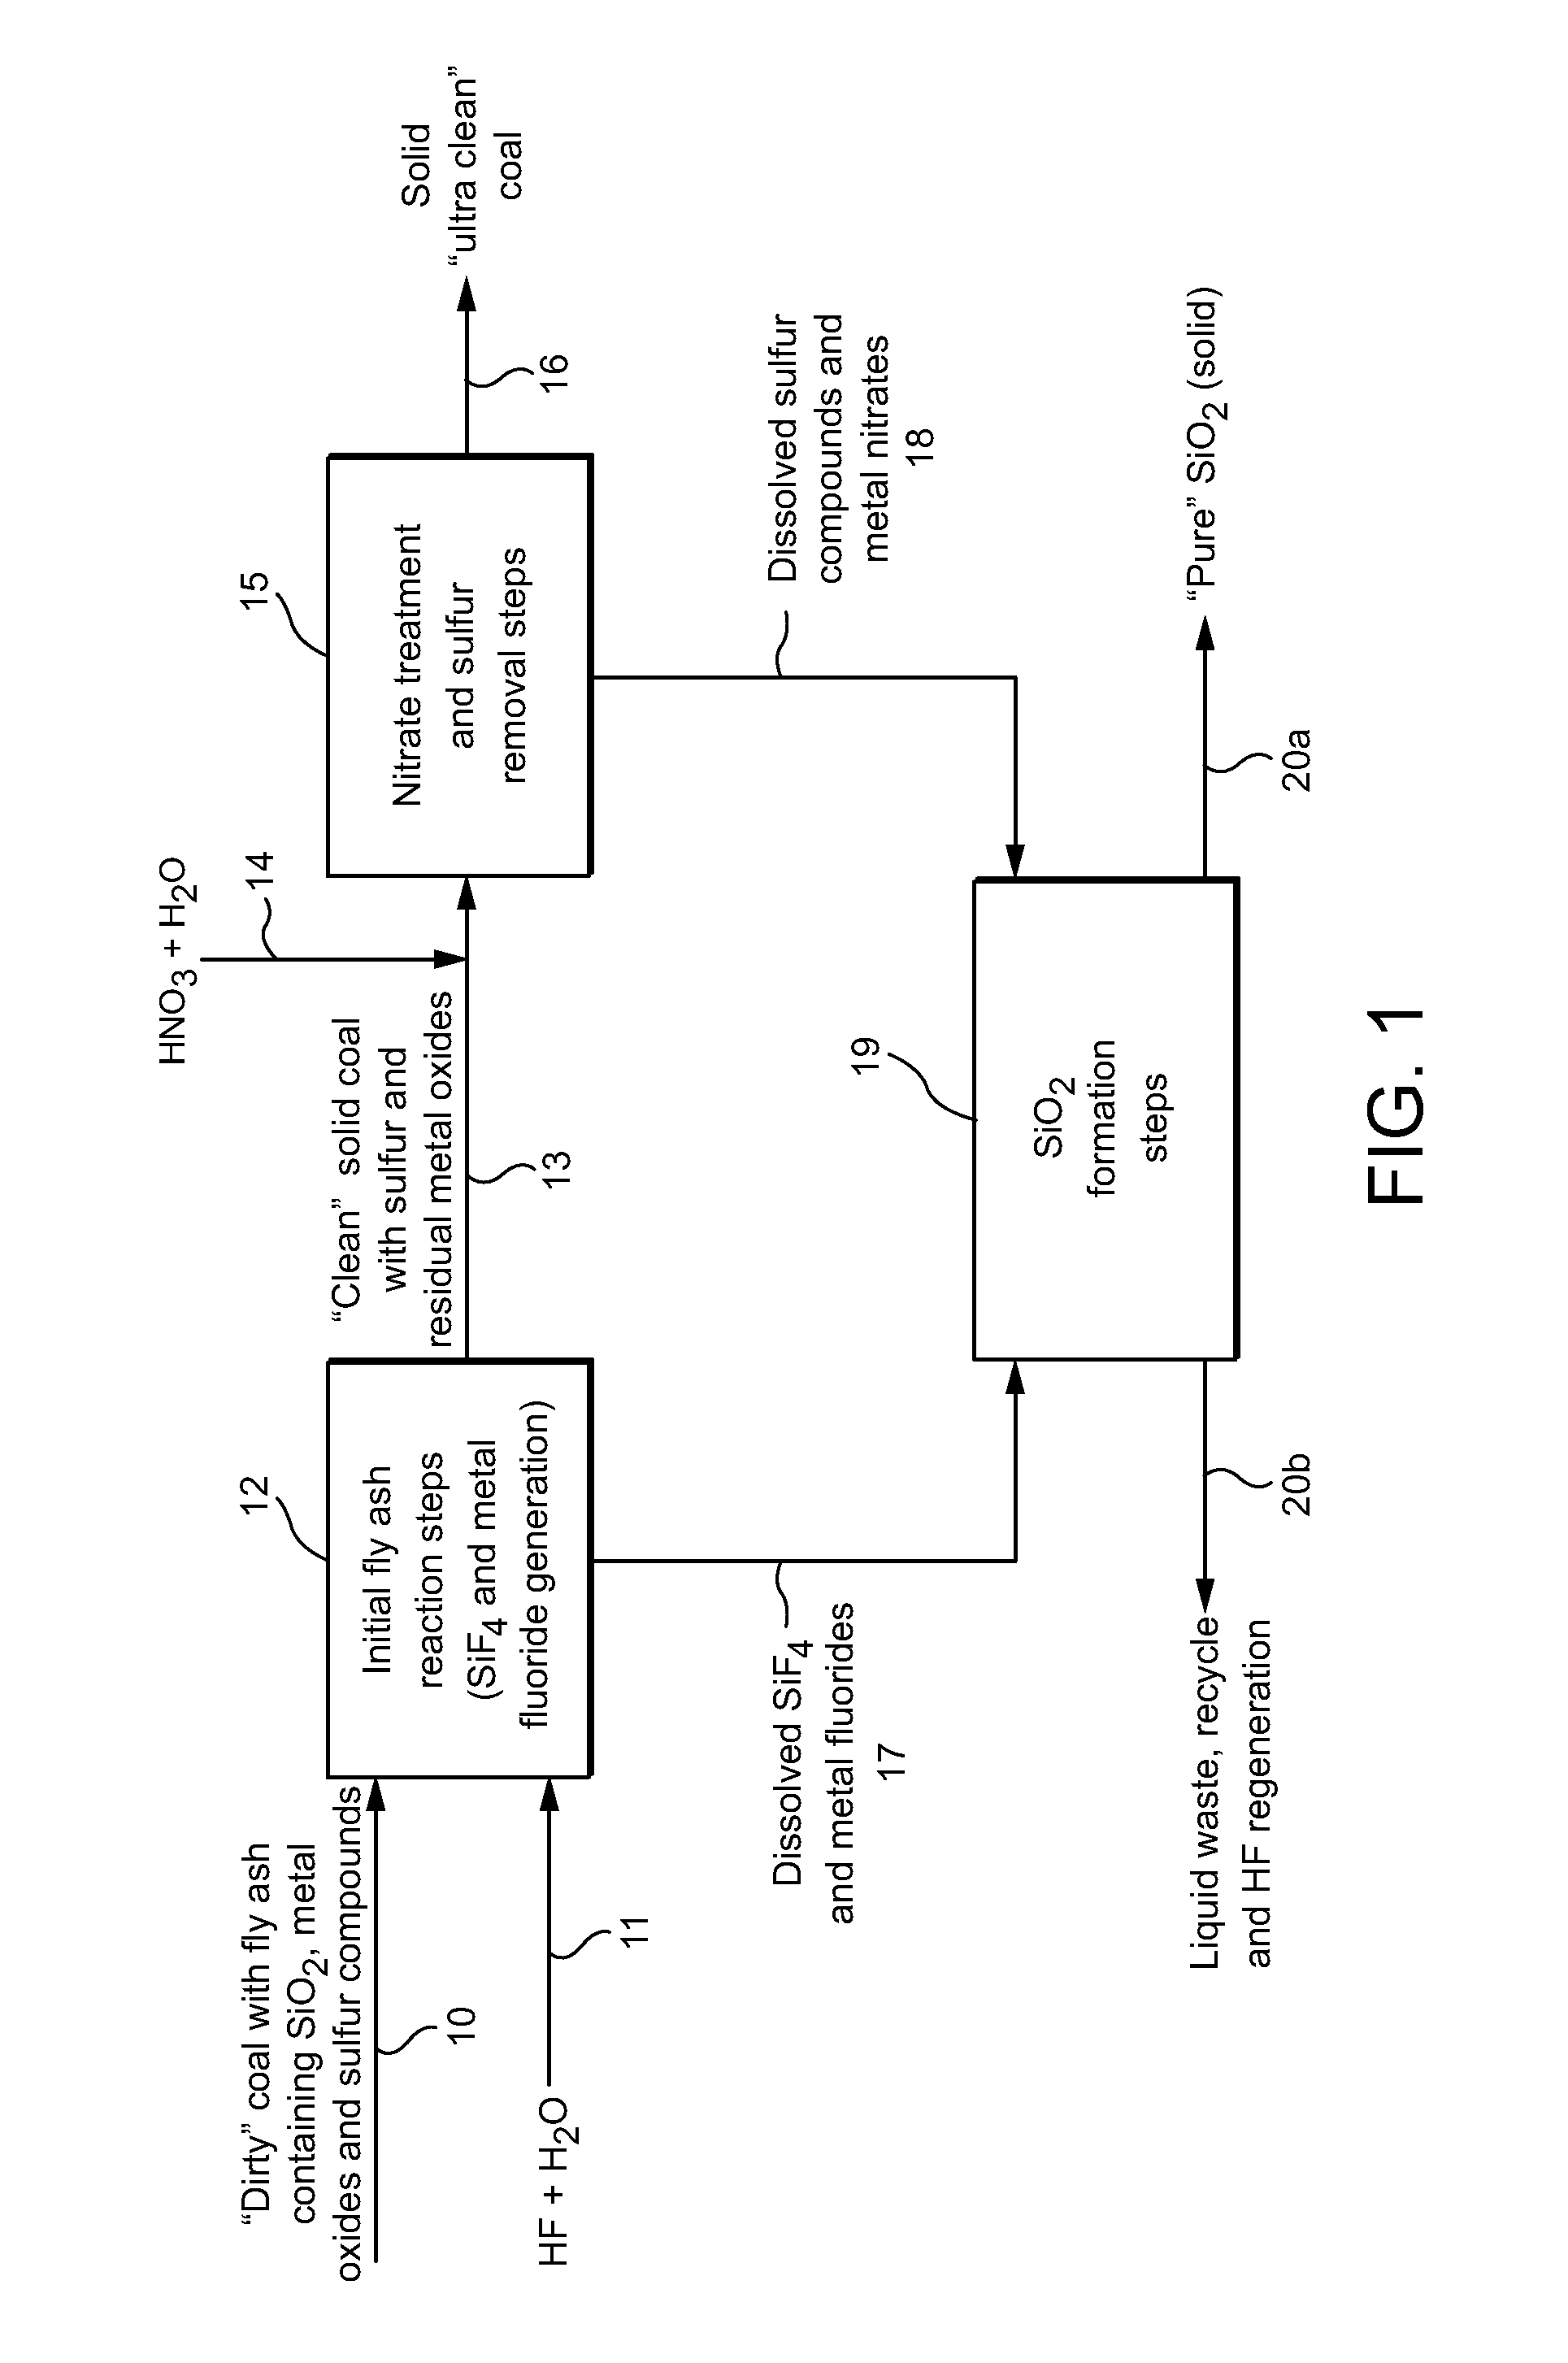 Process for obtaining treated coal and silica from coal containing fly ash